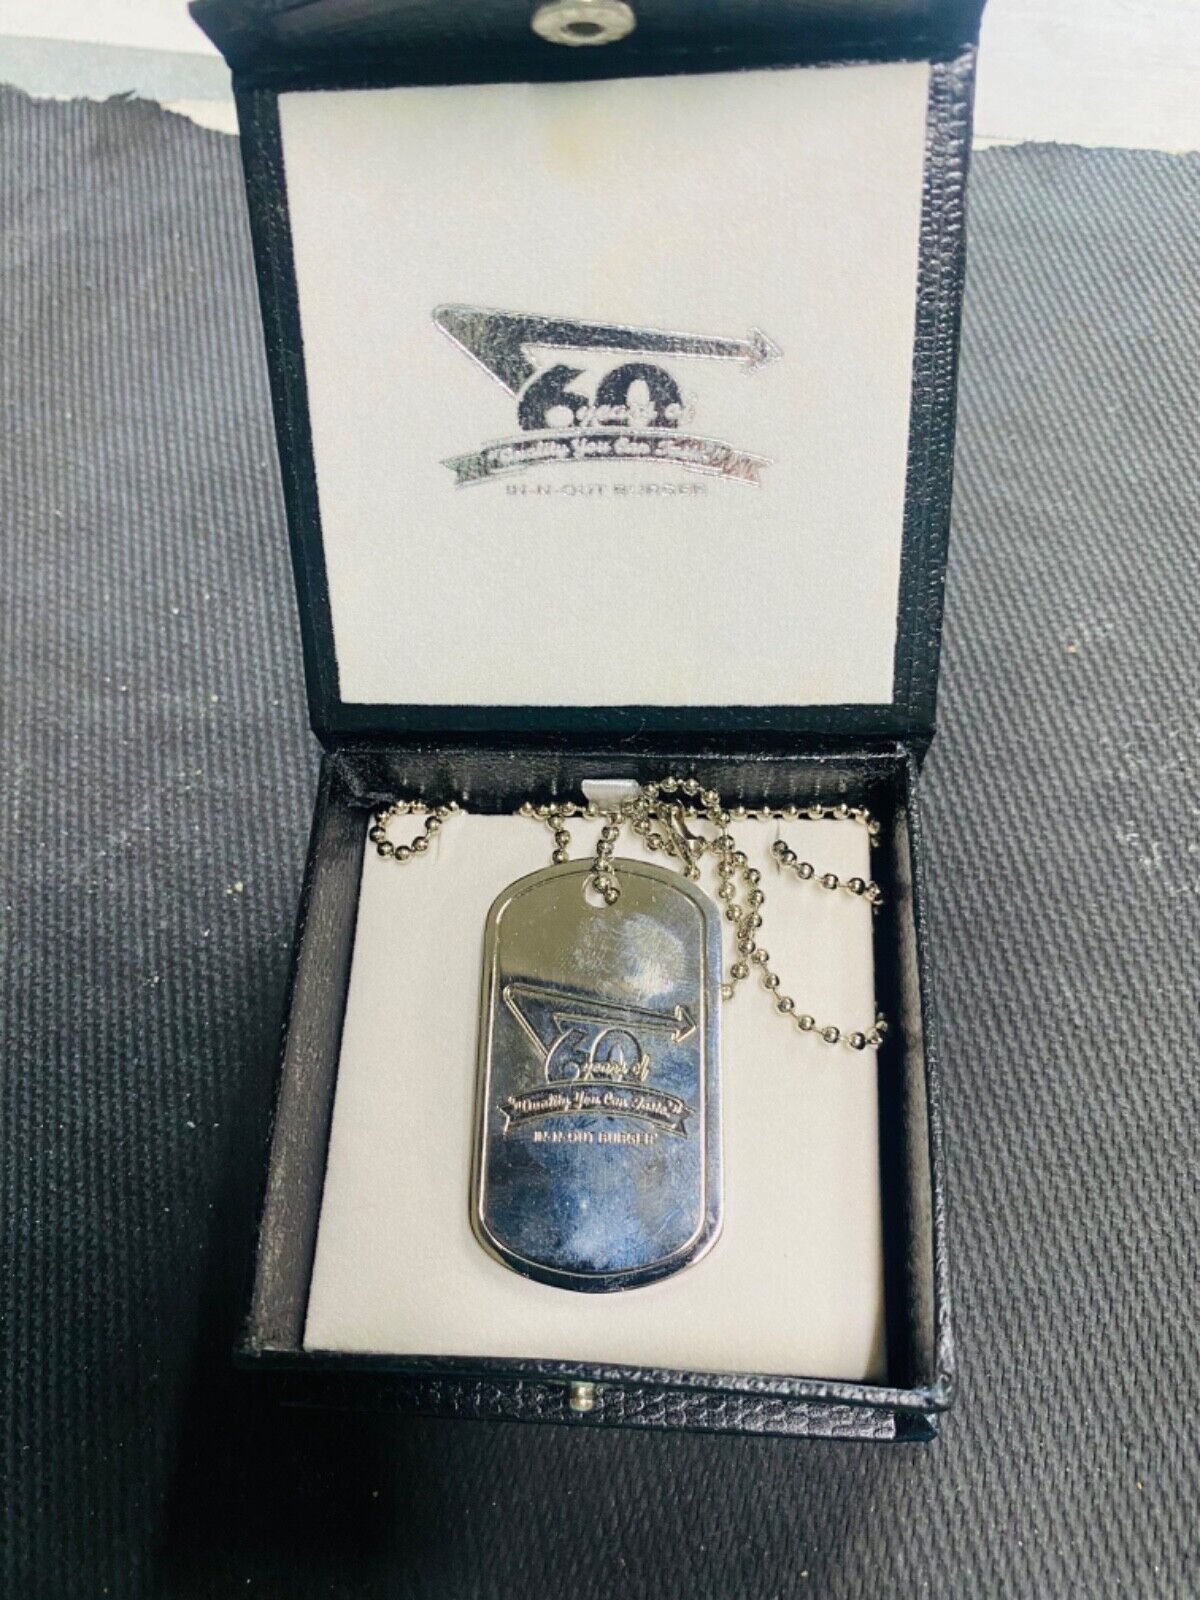 RARE In-N-Out Burger 60th Anniversary Dog Tag Necklace - Solid Silver Pend - NIB